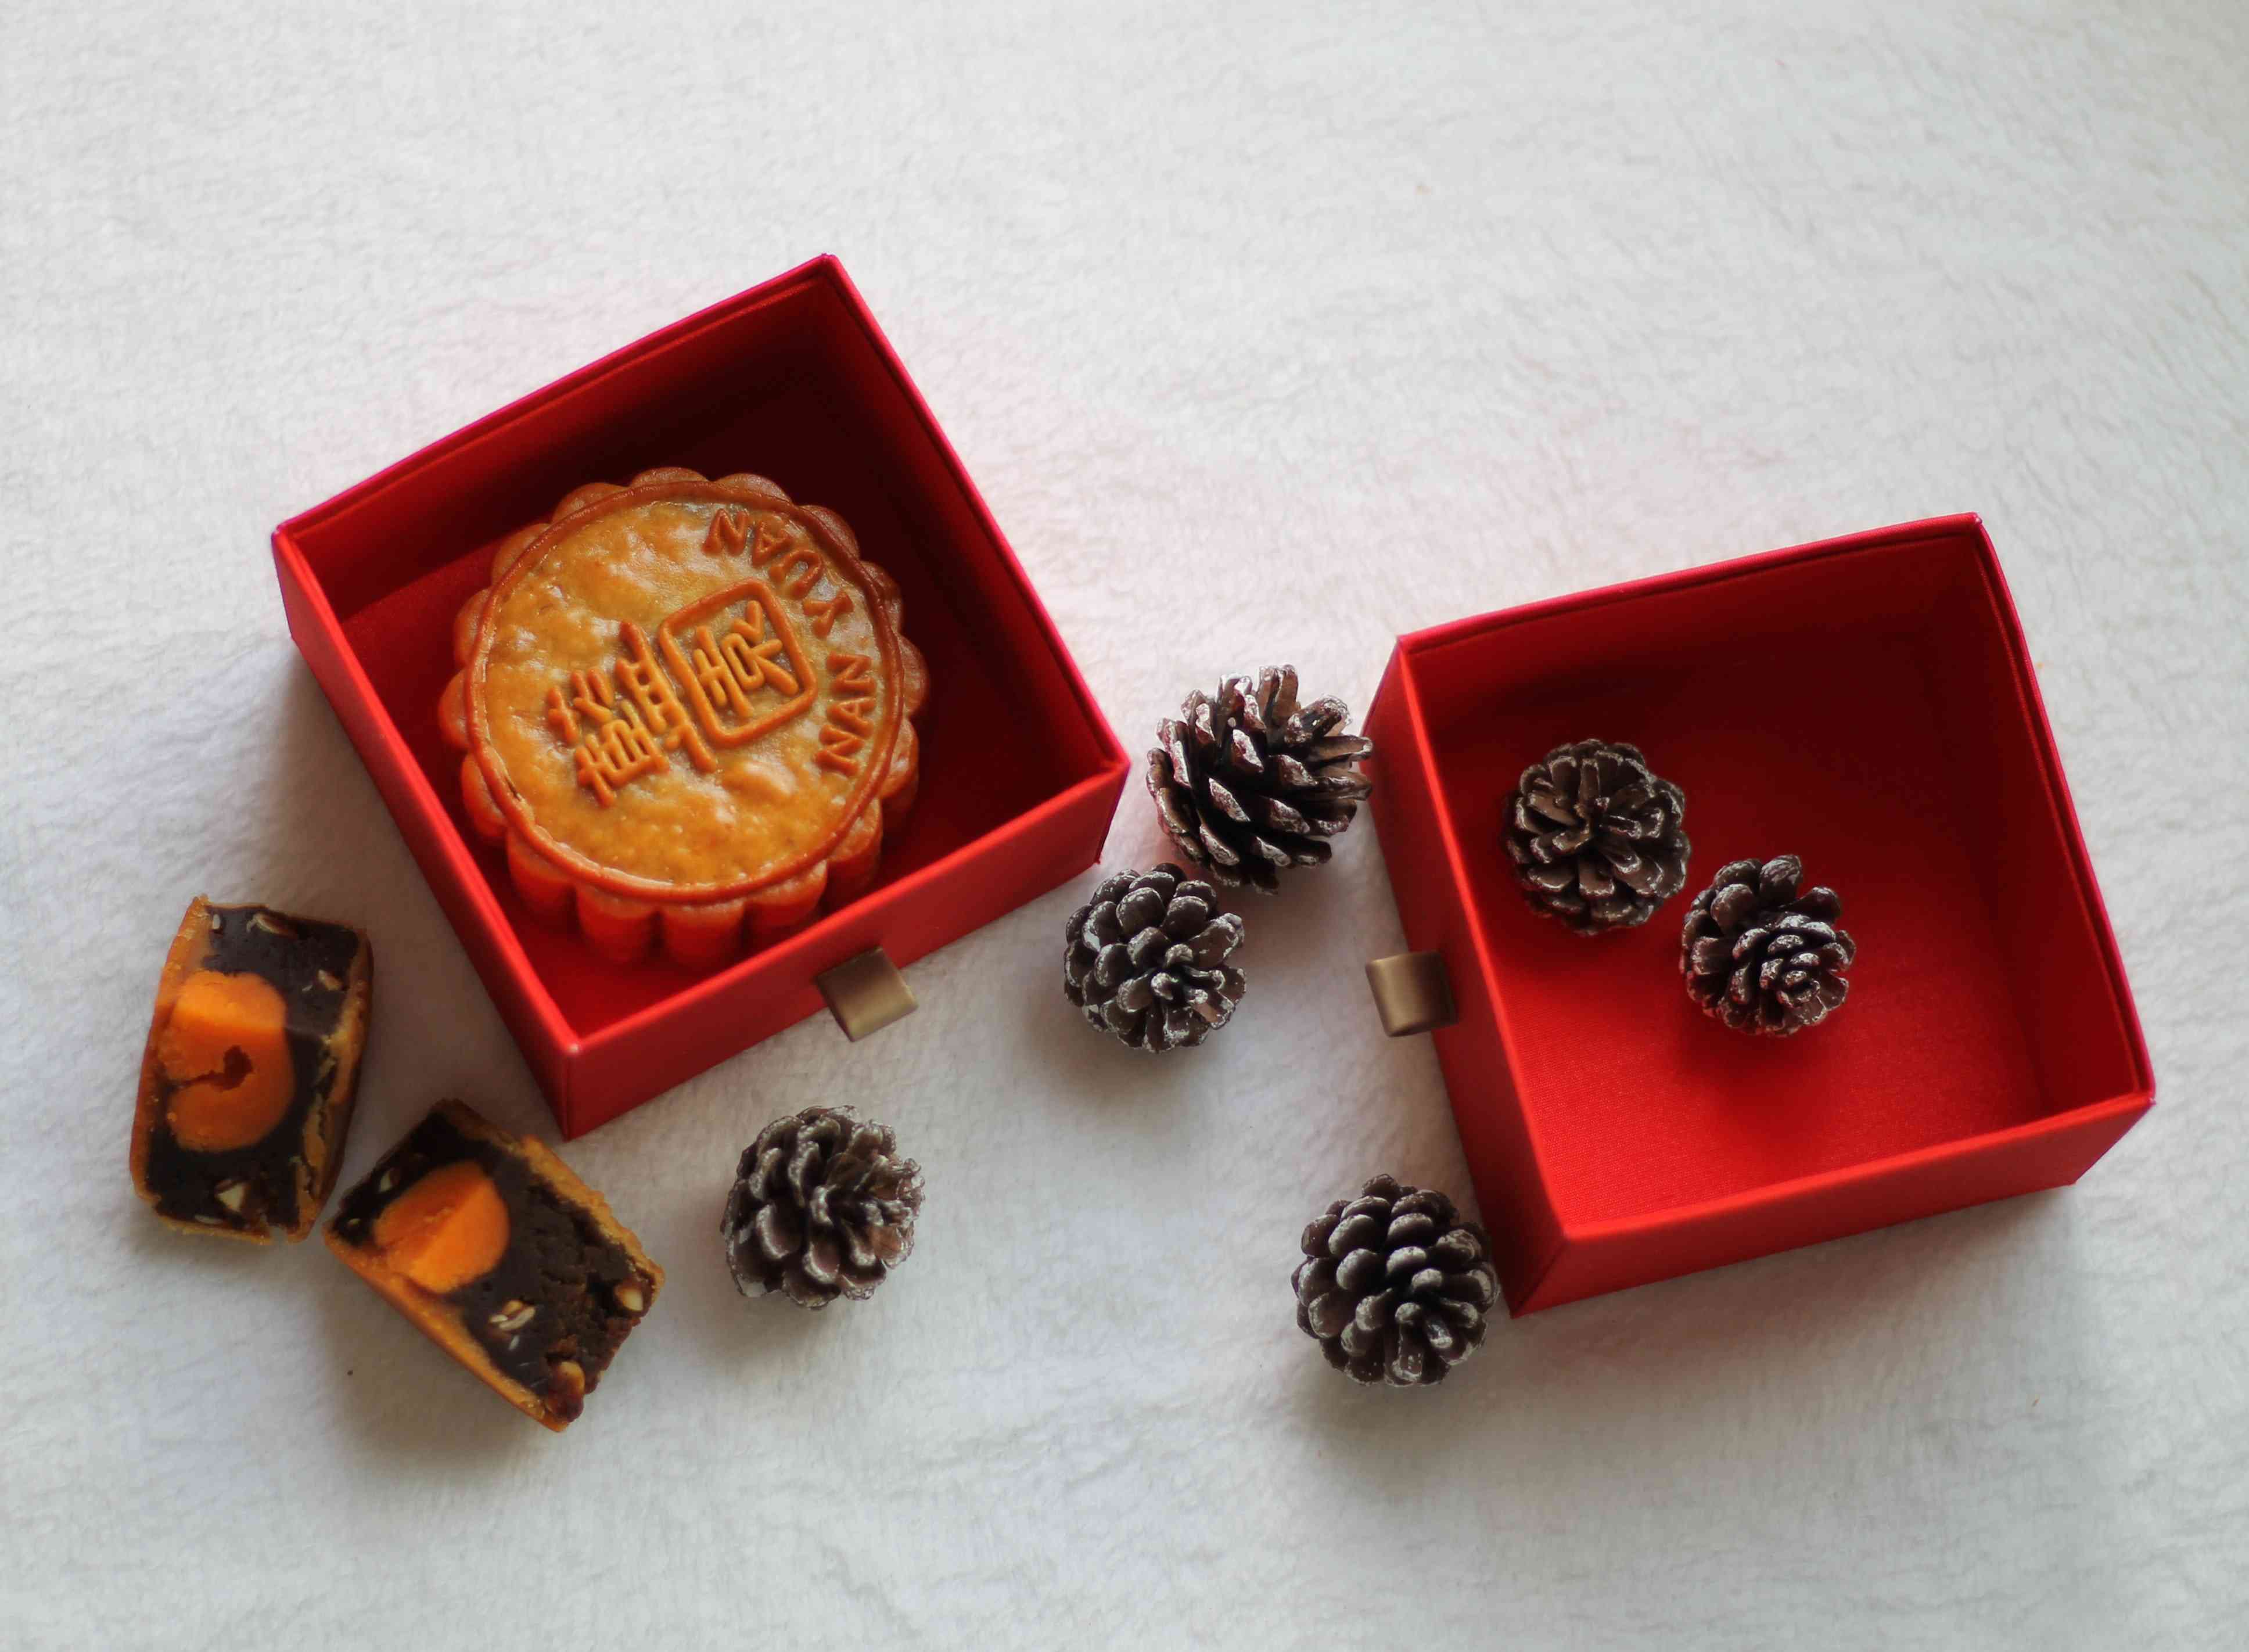 Mooncakes are a delicious staple of the Mooncake Festival